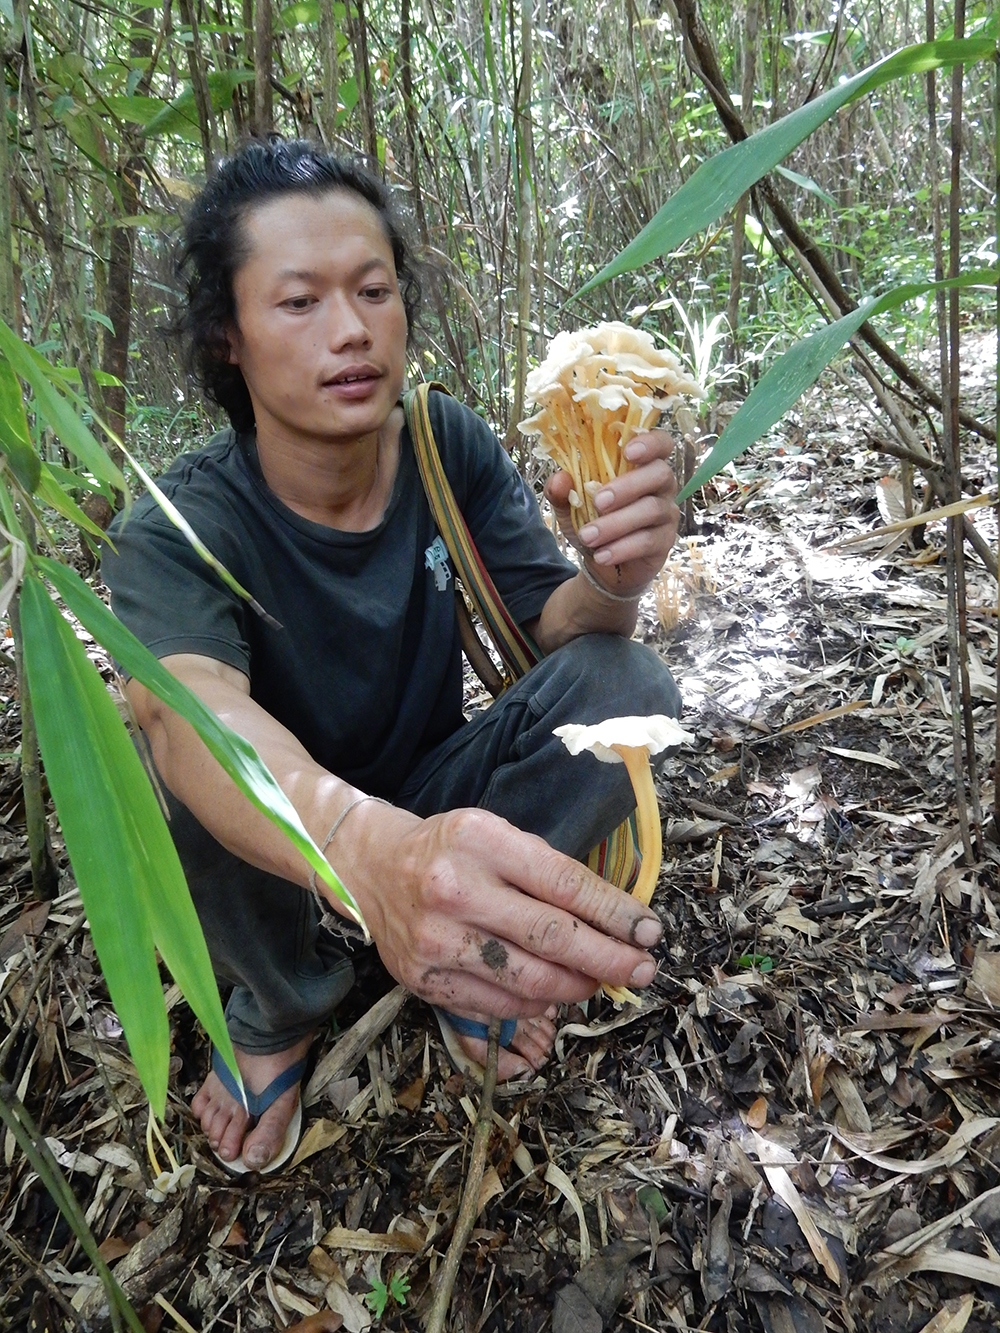 Forest food: Hin Lad Nai community members tracked mushrooms and other edible plants for MEB approaches, while logging their fields and agricultural practices. Copyright: Pernilla Malmer.